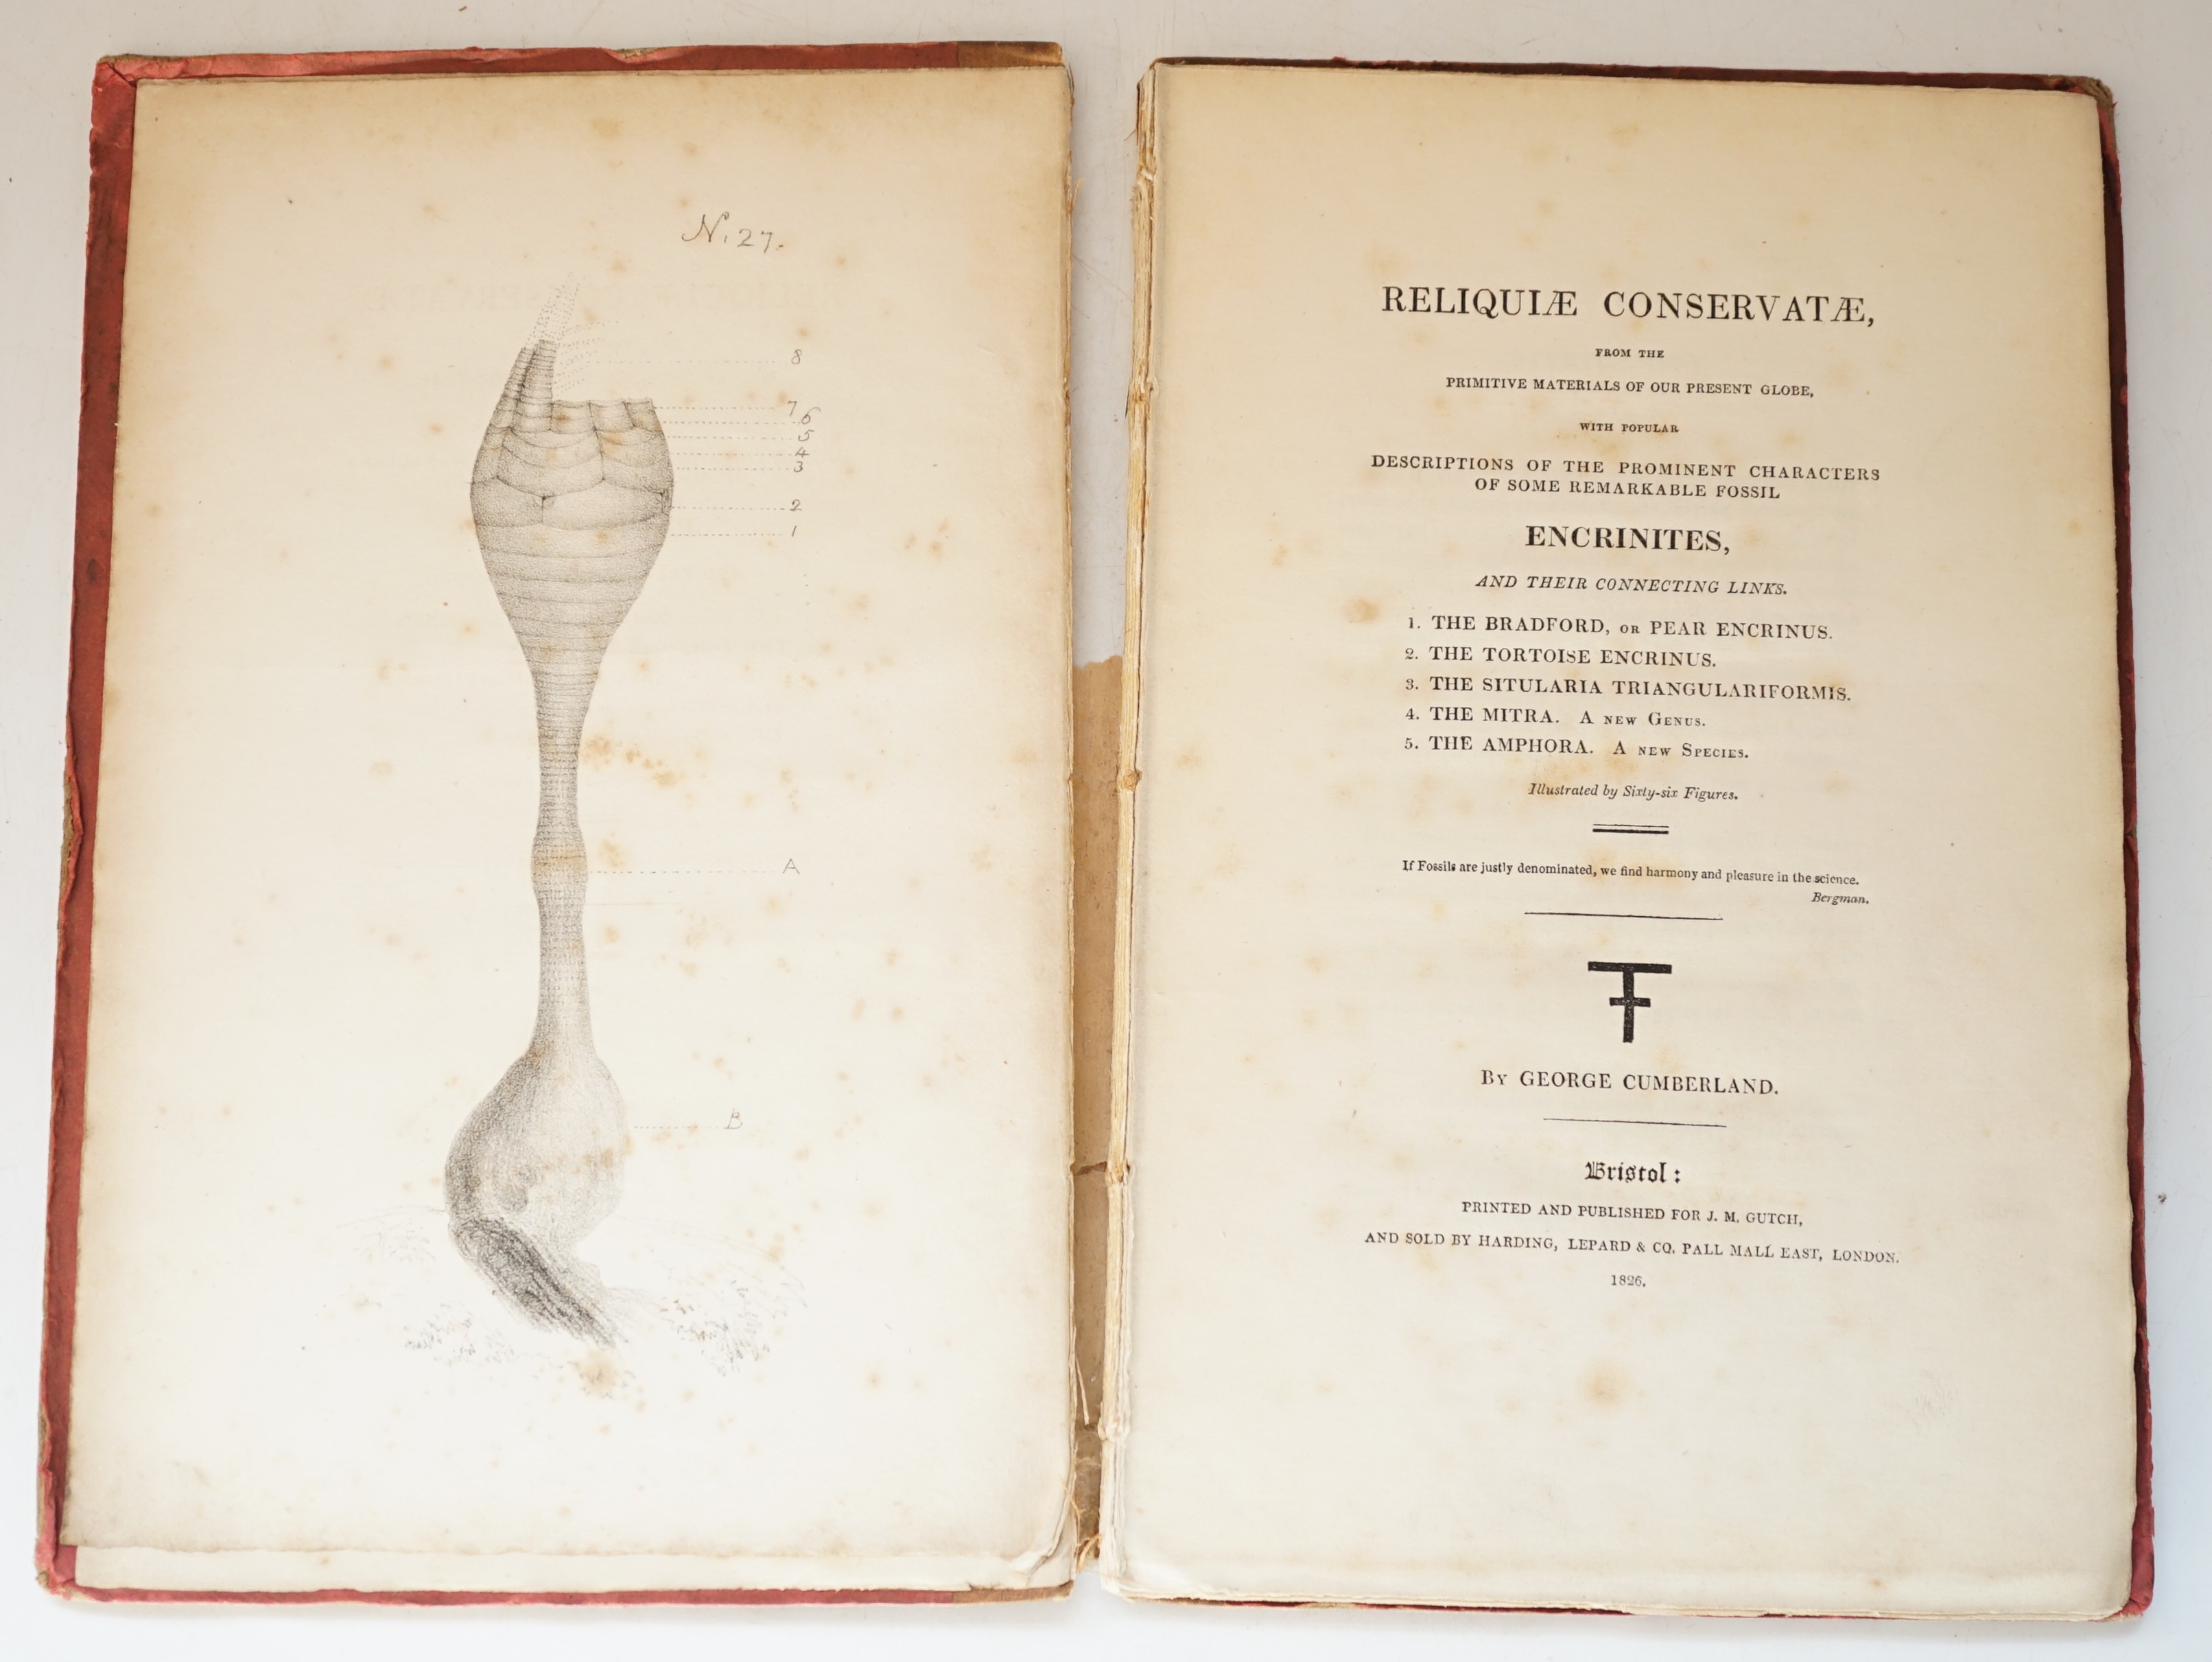 Cumberland, George - Reliquiae Conservatae, from the Primitive Materials of our Present Globe, with Popular Descriptions of the Prominent Characters of some remarkable Fossil Encrinites…, First Edition, one of 150 copies